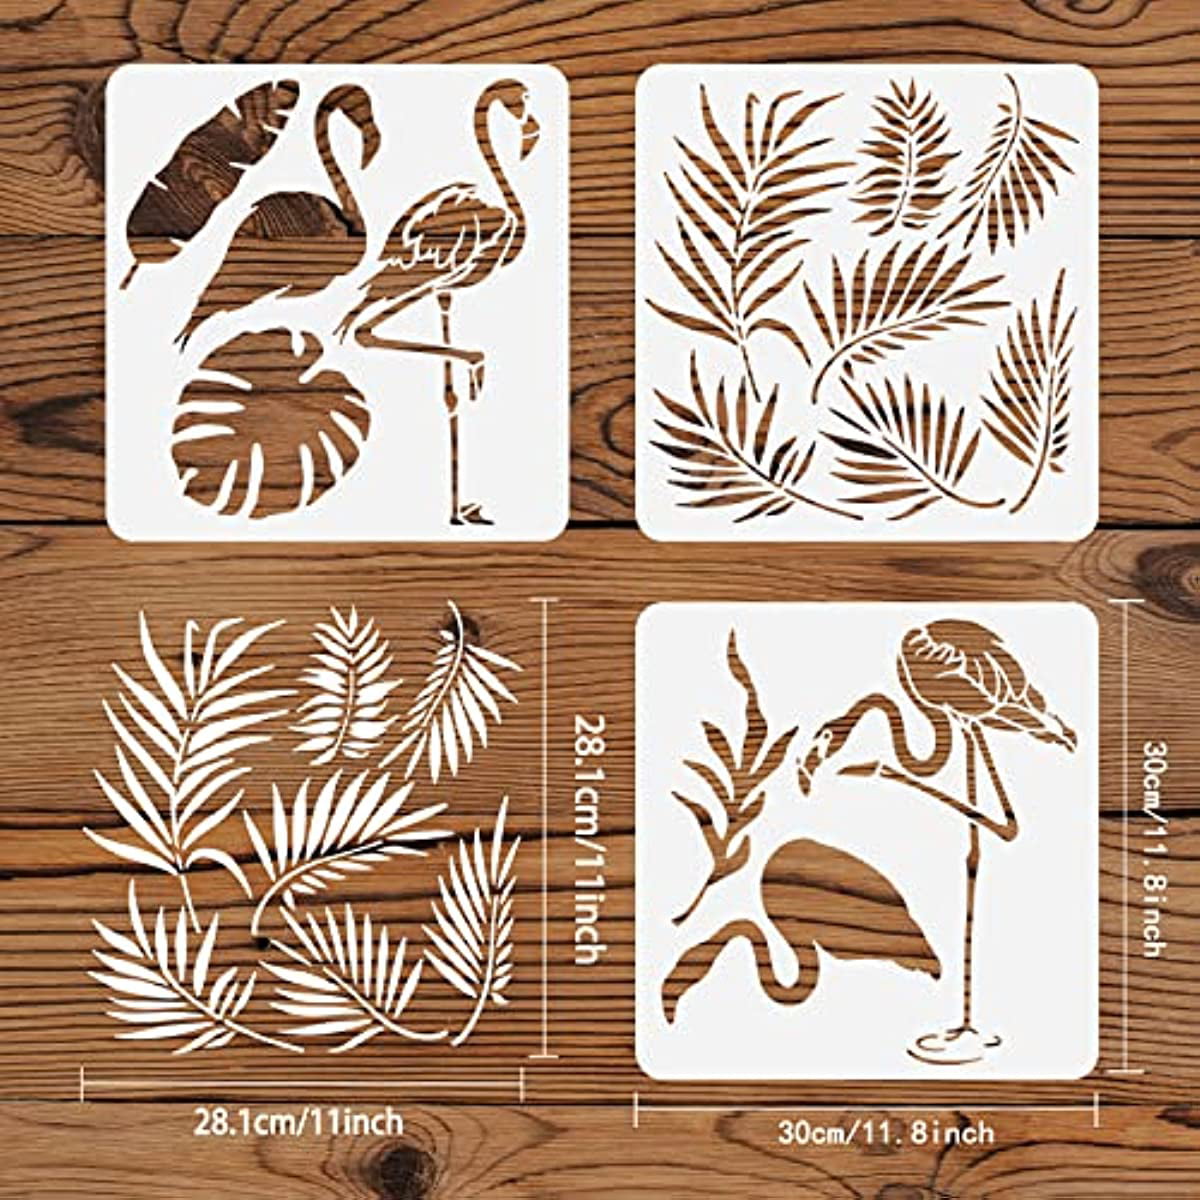 3 pcs Camo Stencil Kit 11.8x11.8inch Camo Stencils for Spray Paint  Camouflage Pattern Stencils for Painting on Wood Canvas - AliExpress